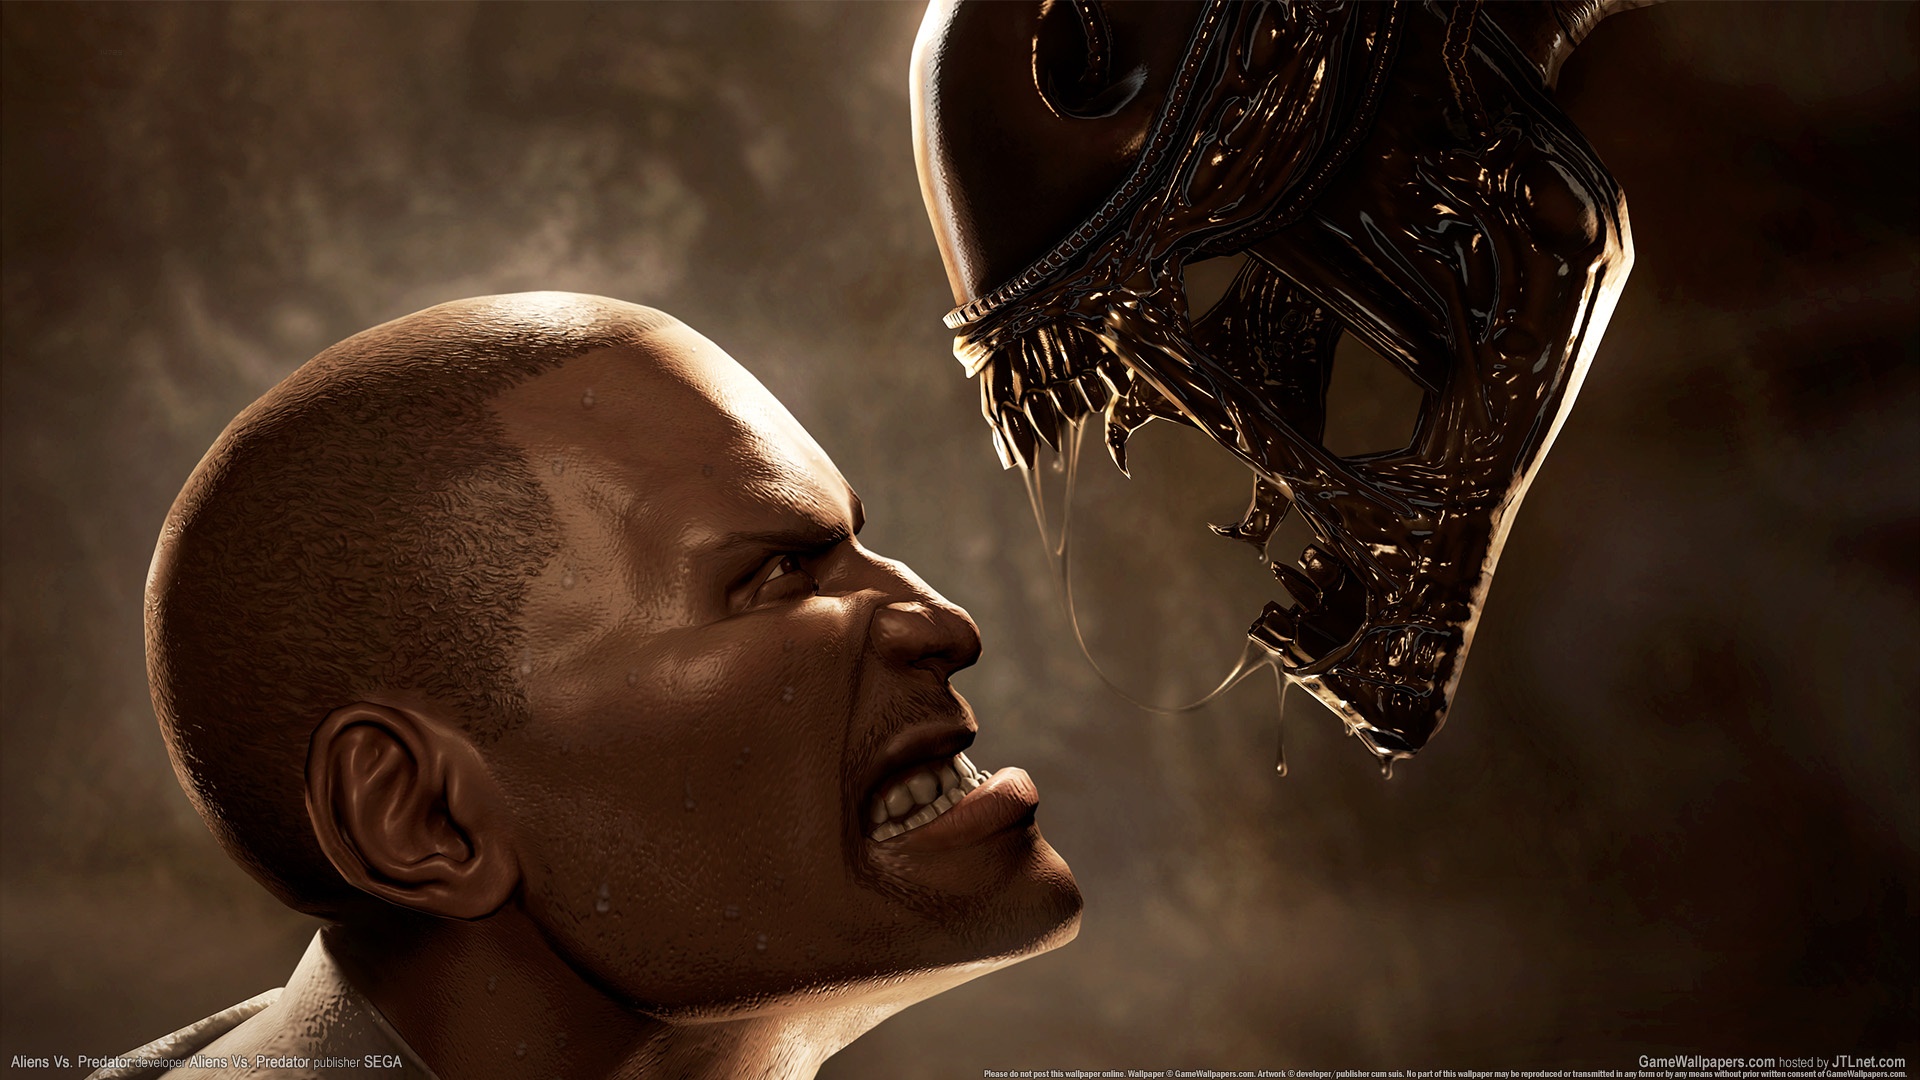 Alien Full HD, HDTV, 1080p 16:9 Wallpapers, HD Alien 1920x1080 Backgrounds,  Free Images Download